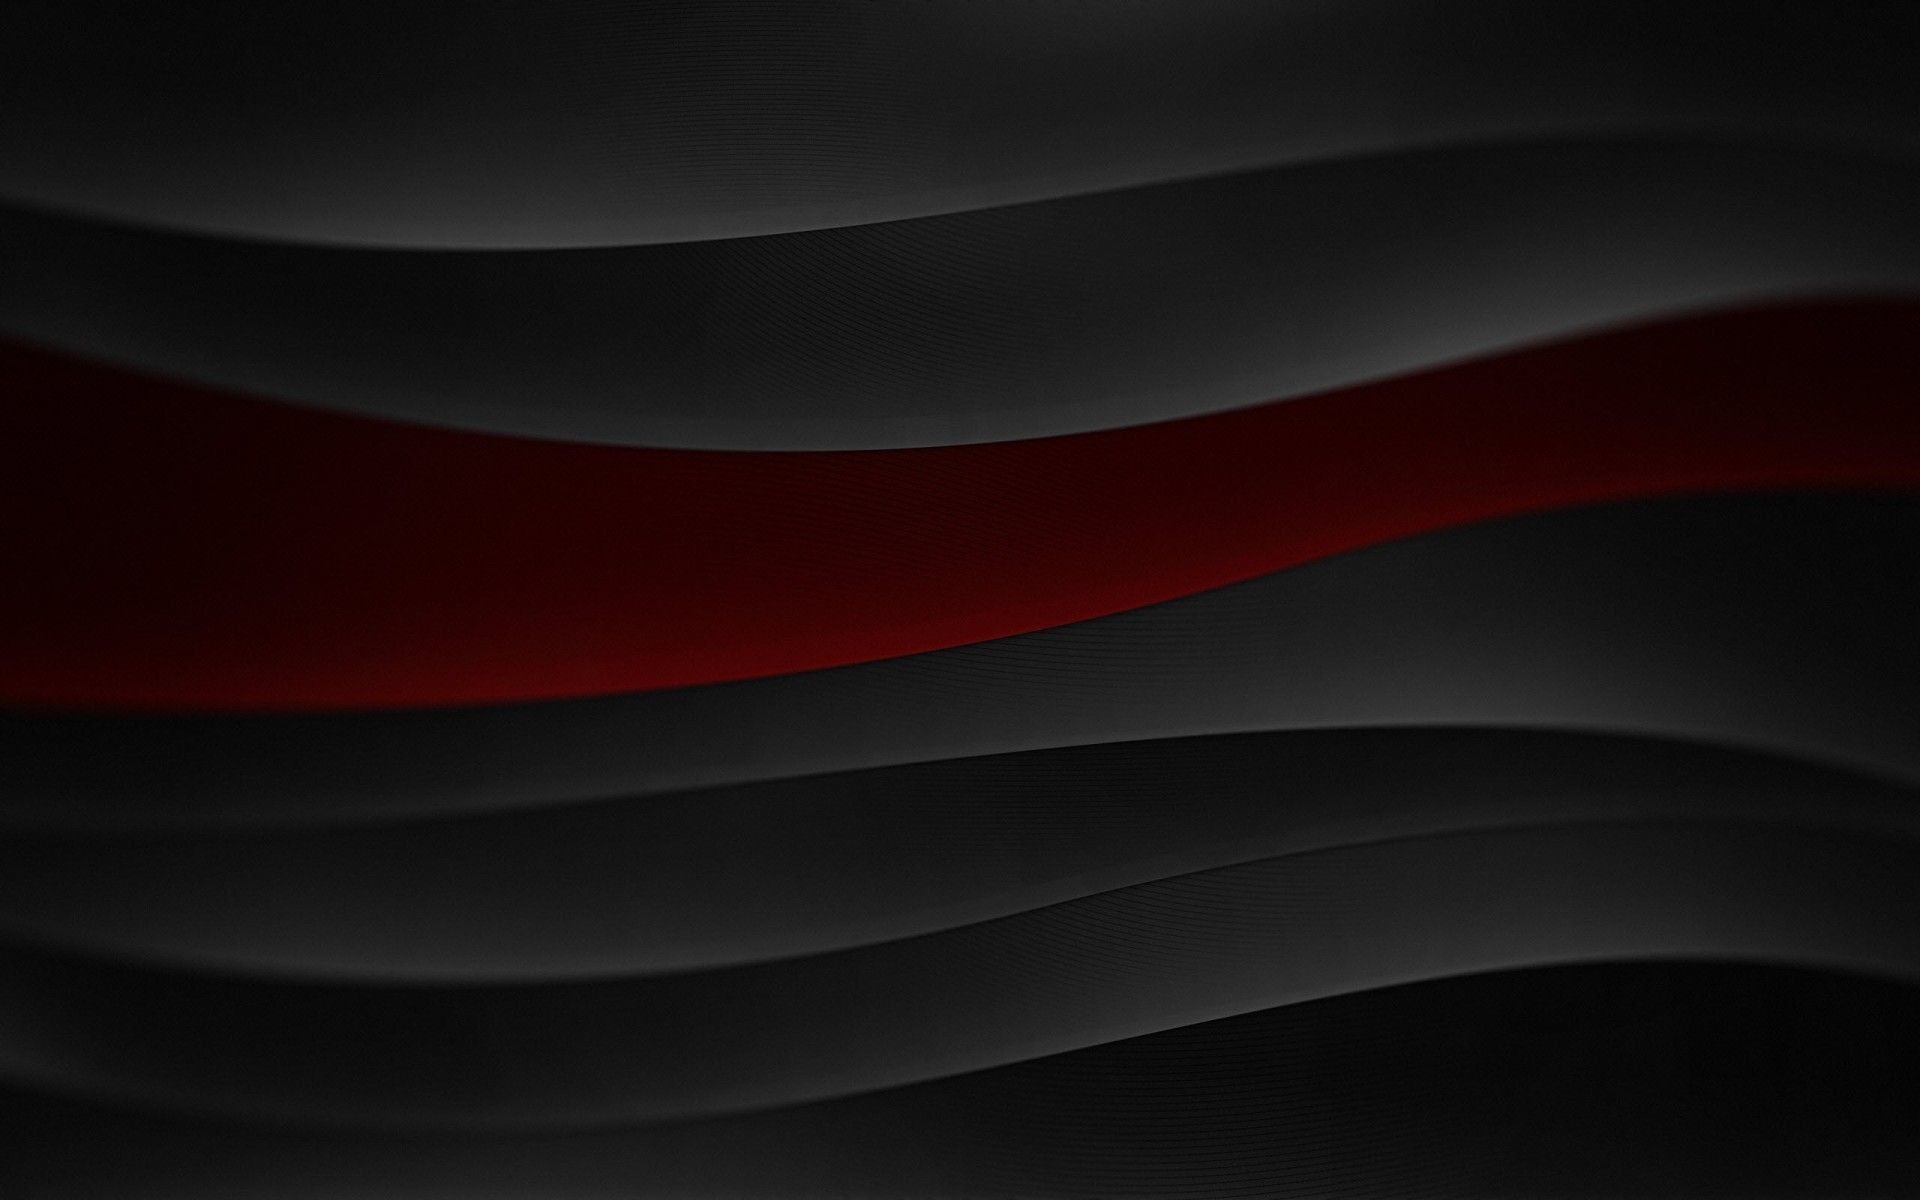 1920x1200 1920x1080 Black And Red Heart Wallpaper Black And Red Heart Wallpaper  Letter .